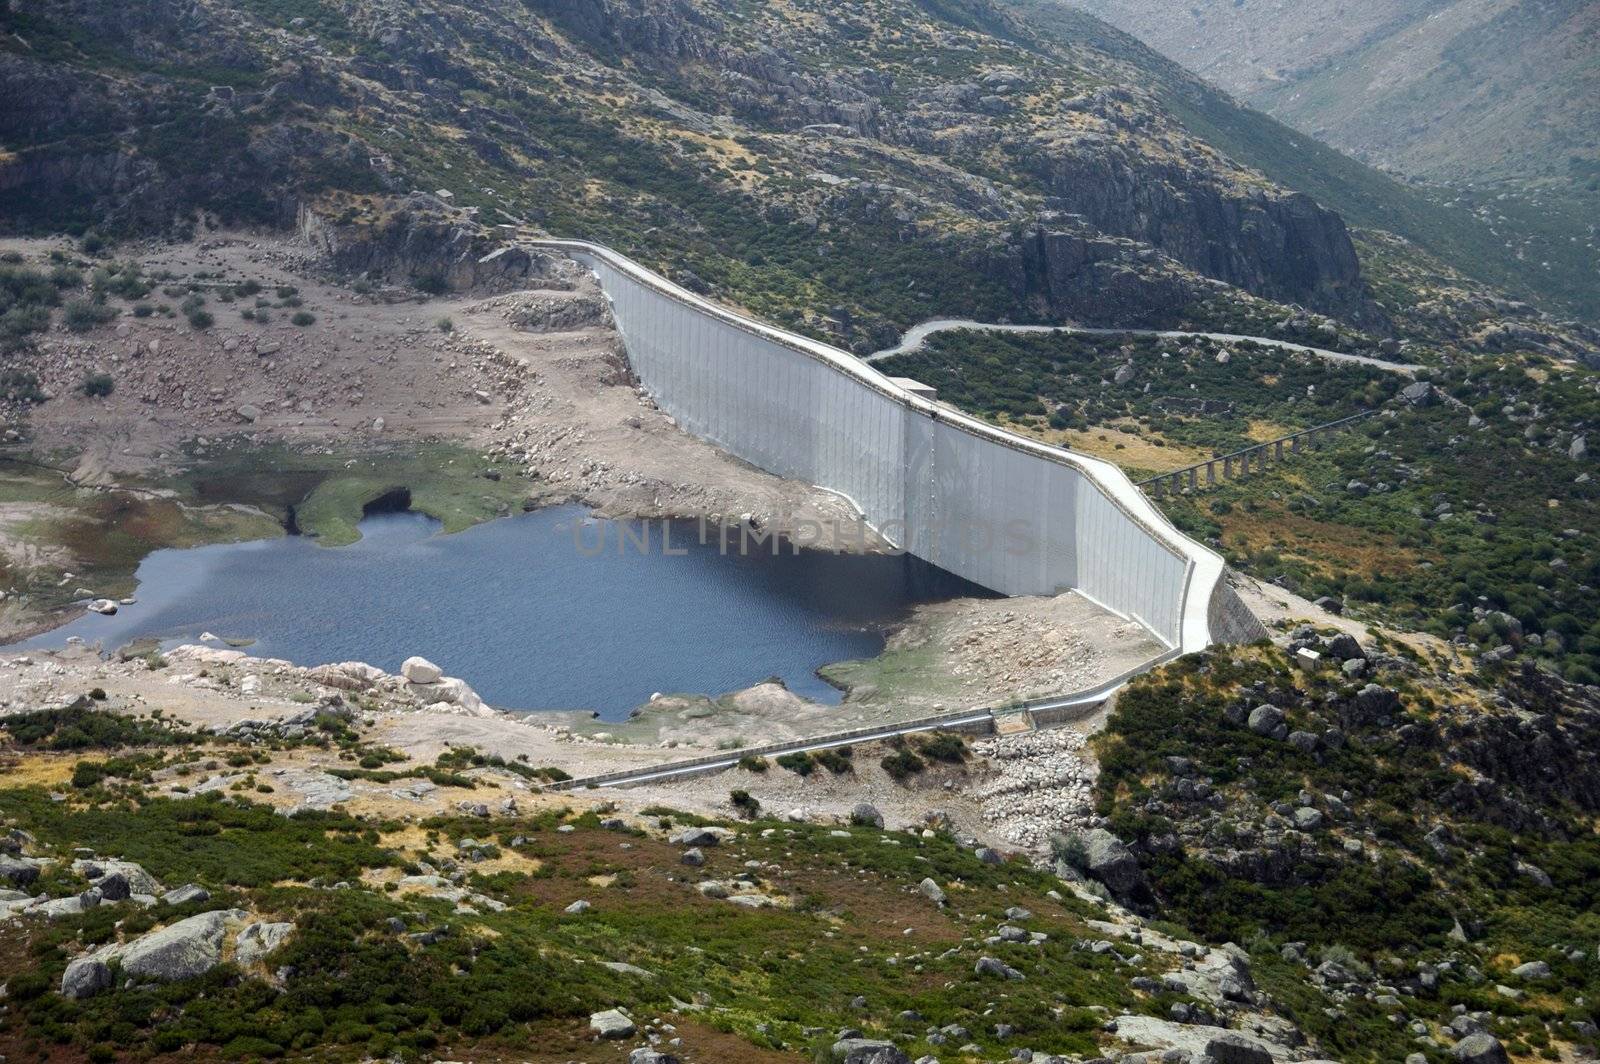 hydroelectric basin and dam situated in mountain area